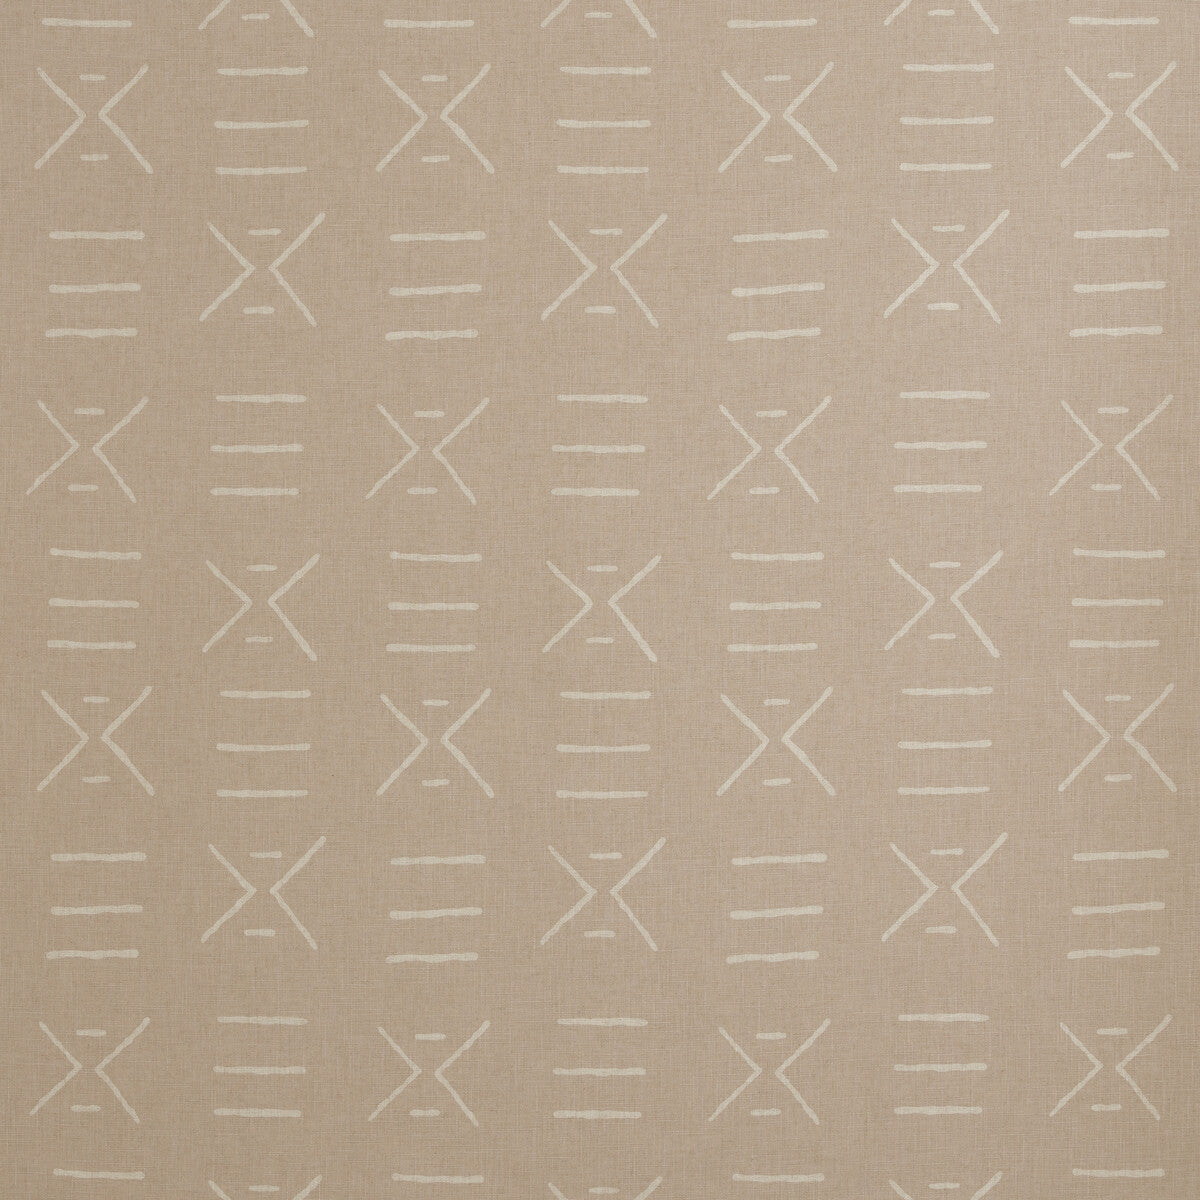 Kongo fabric in plaster color - pattern AM100314.17.0 - by Kravet Couture in the Andrew Martin Gobi collection